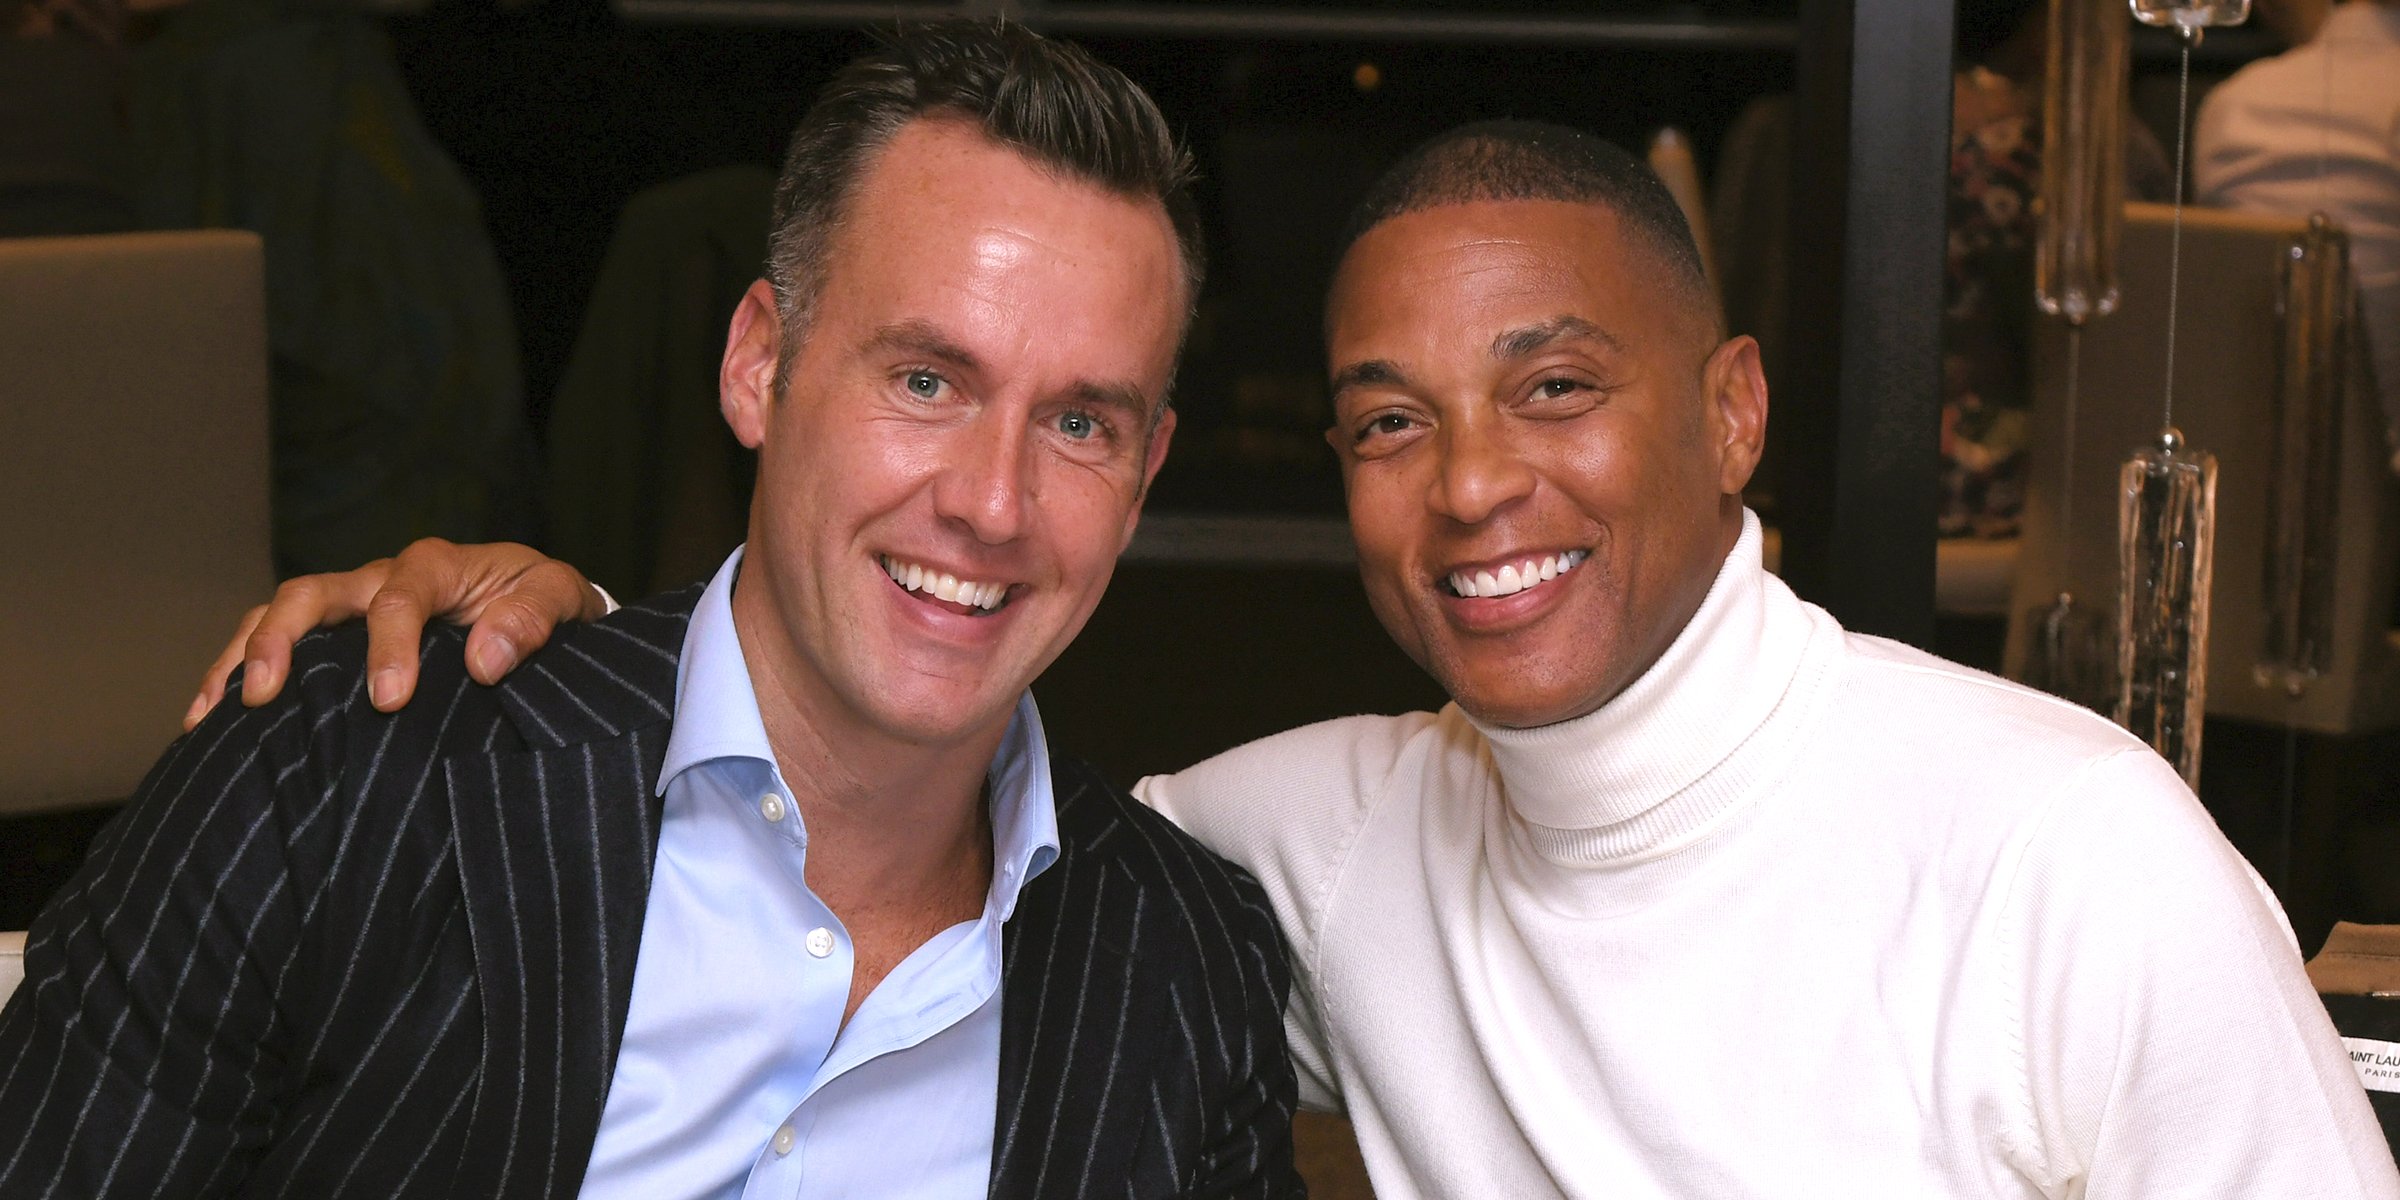 Tim Malone and Don Lemon. | Source: Getty Images